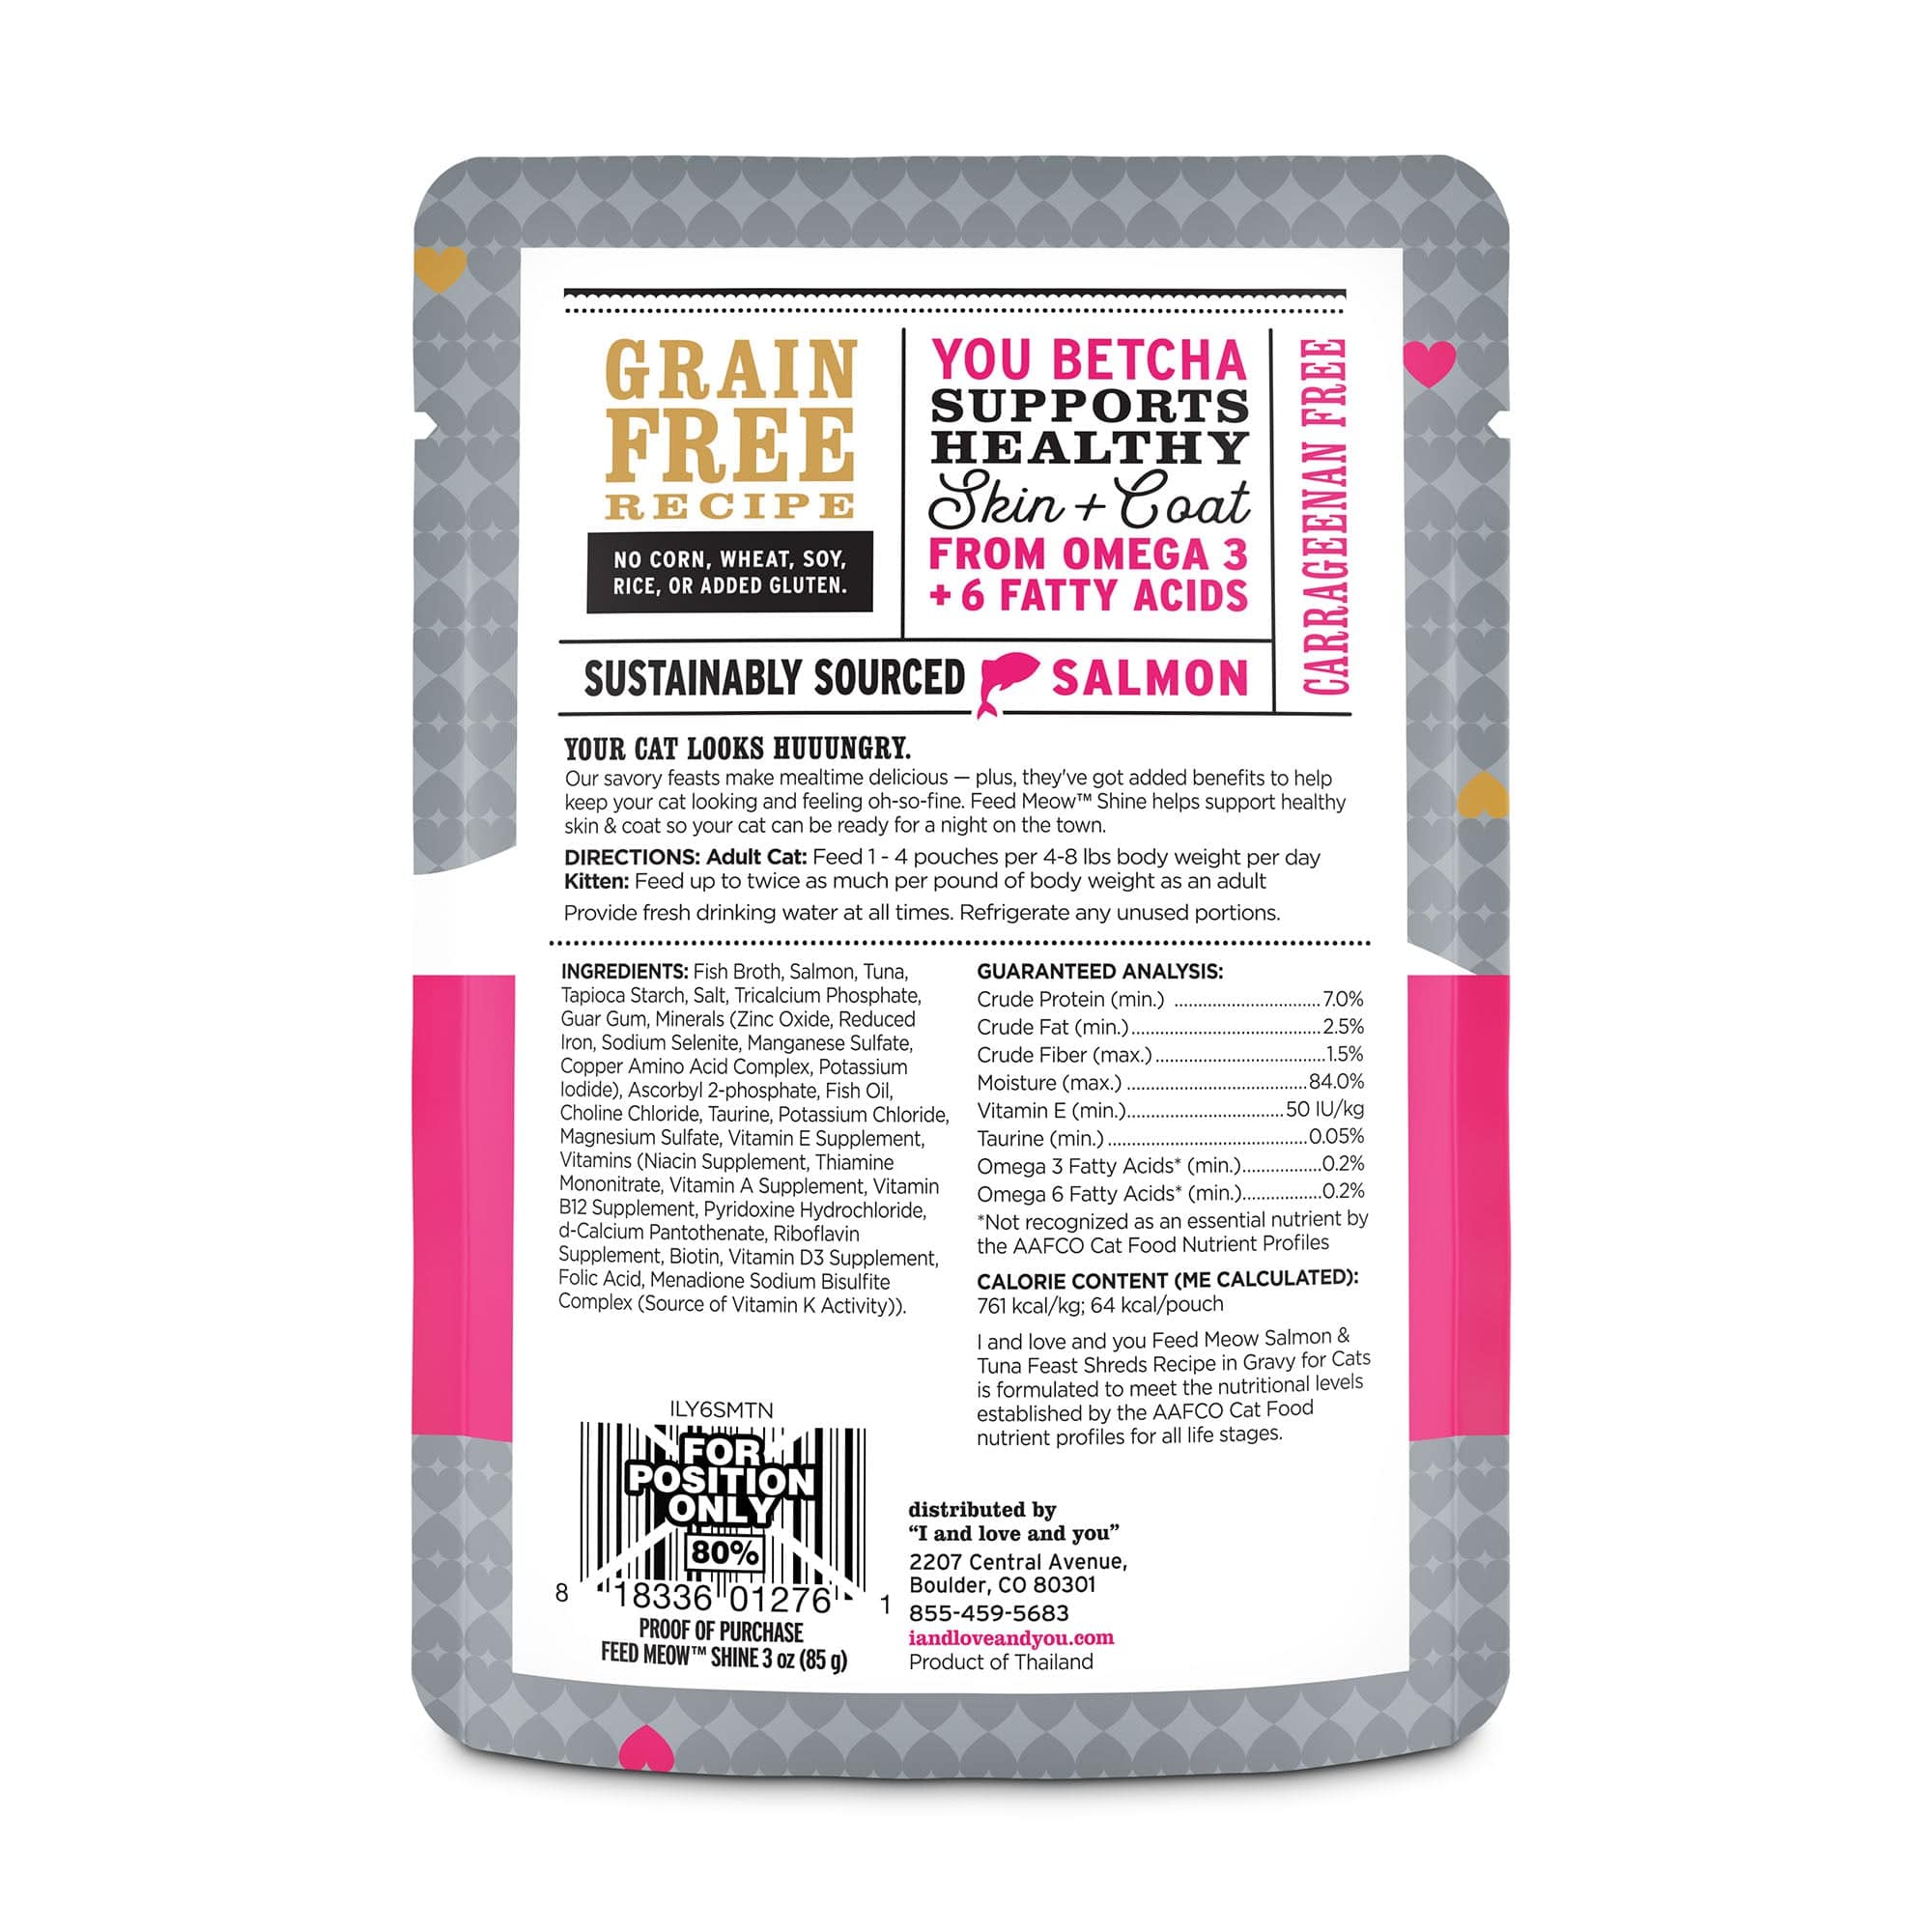 Feed Meow Shine cat food package back side with list of ingredients, instructions and barcode.